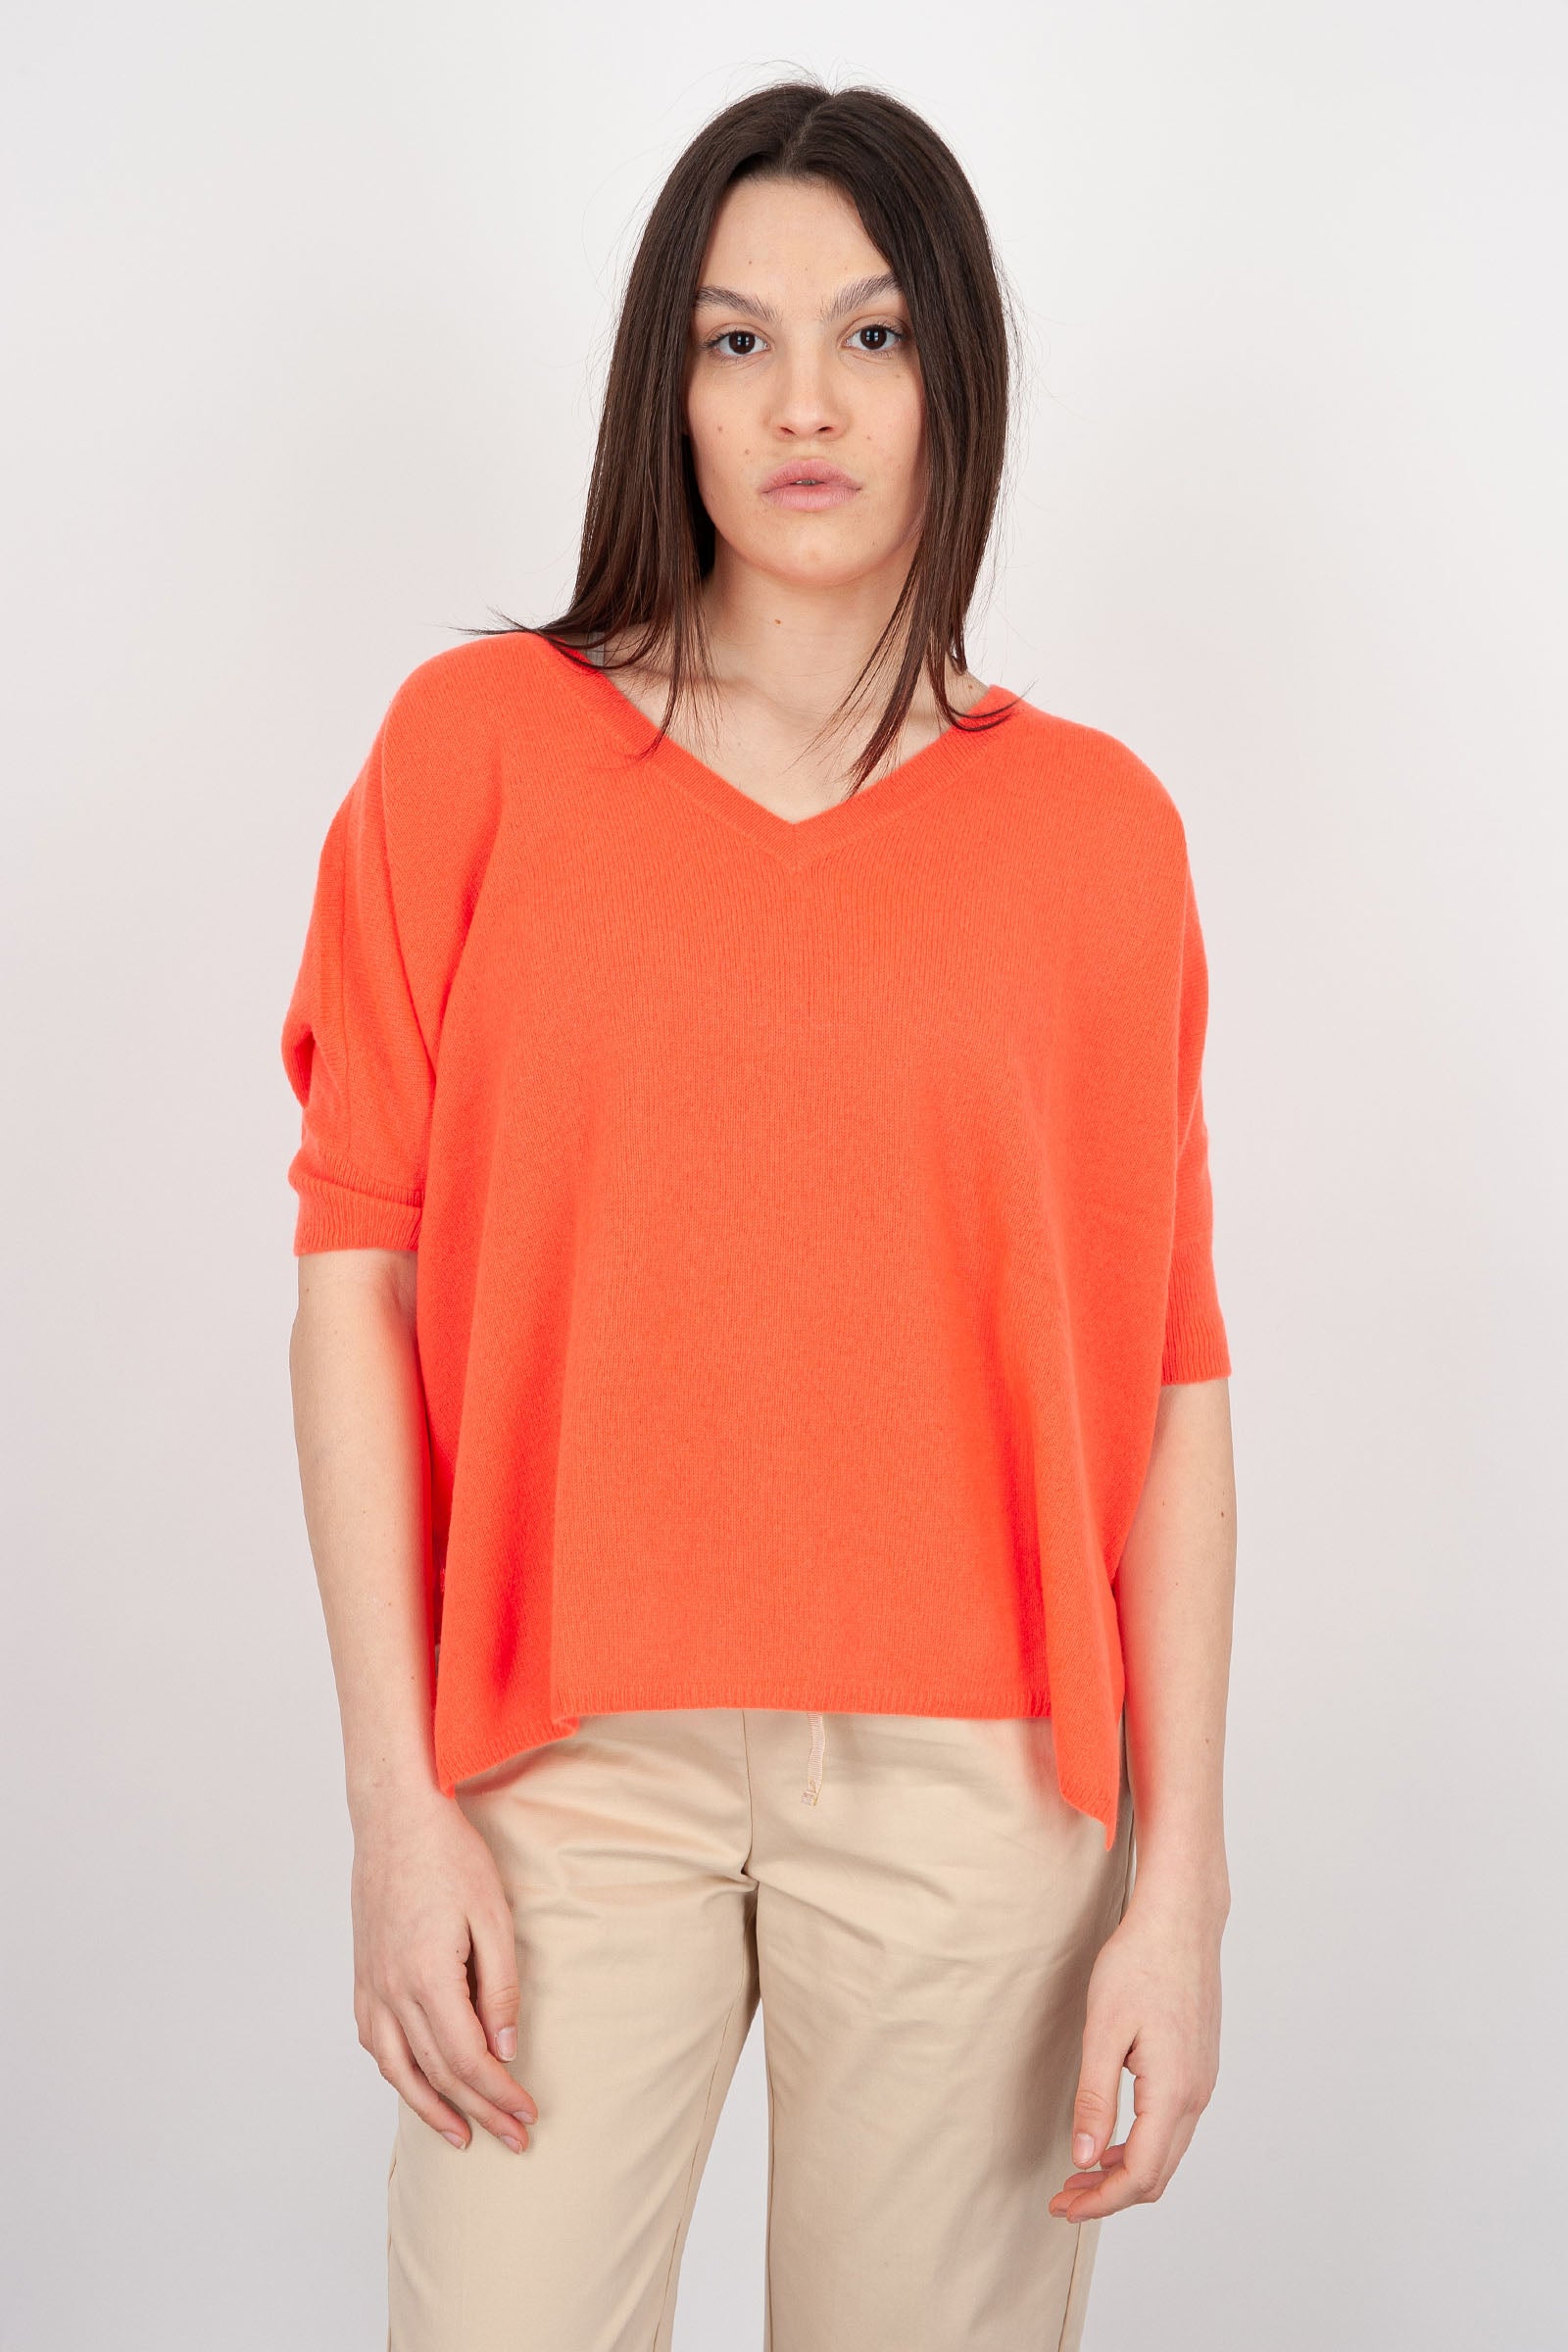 Absolut Cashmere V-Neck Poncho Sweater Coral Wool - 3